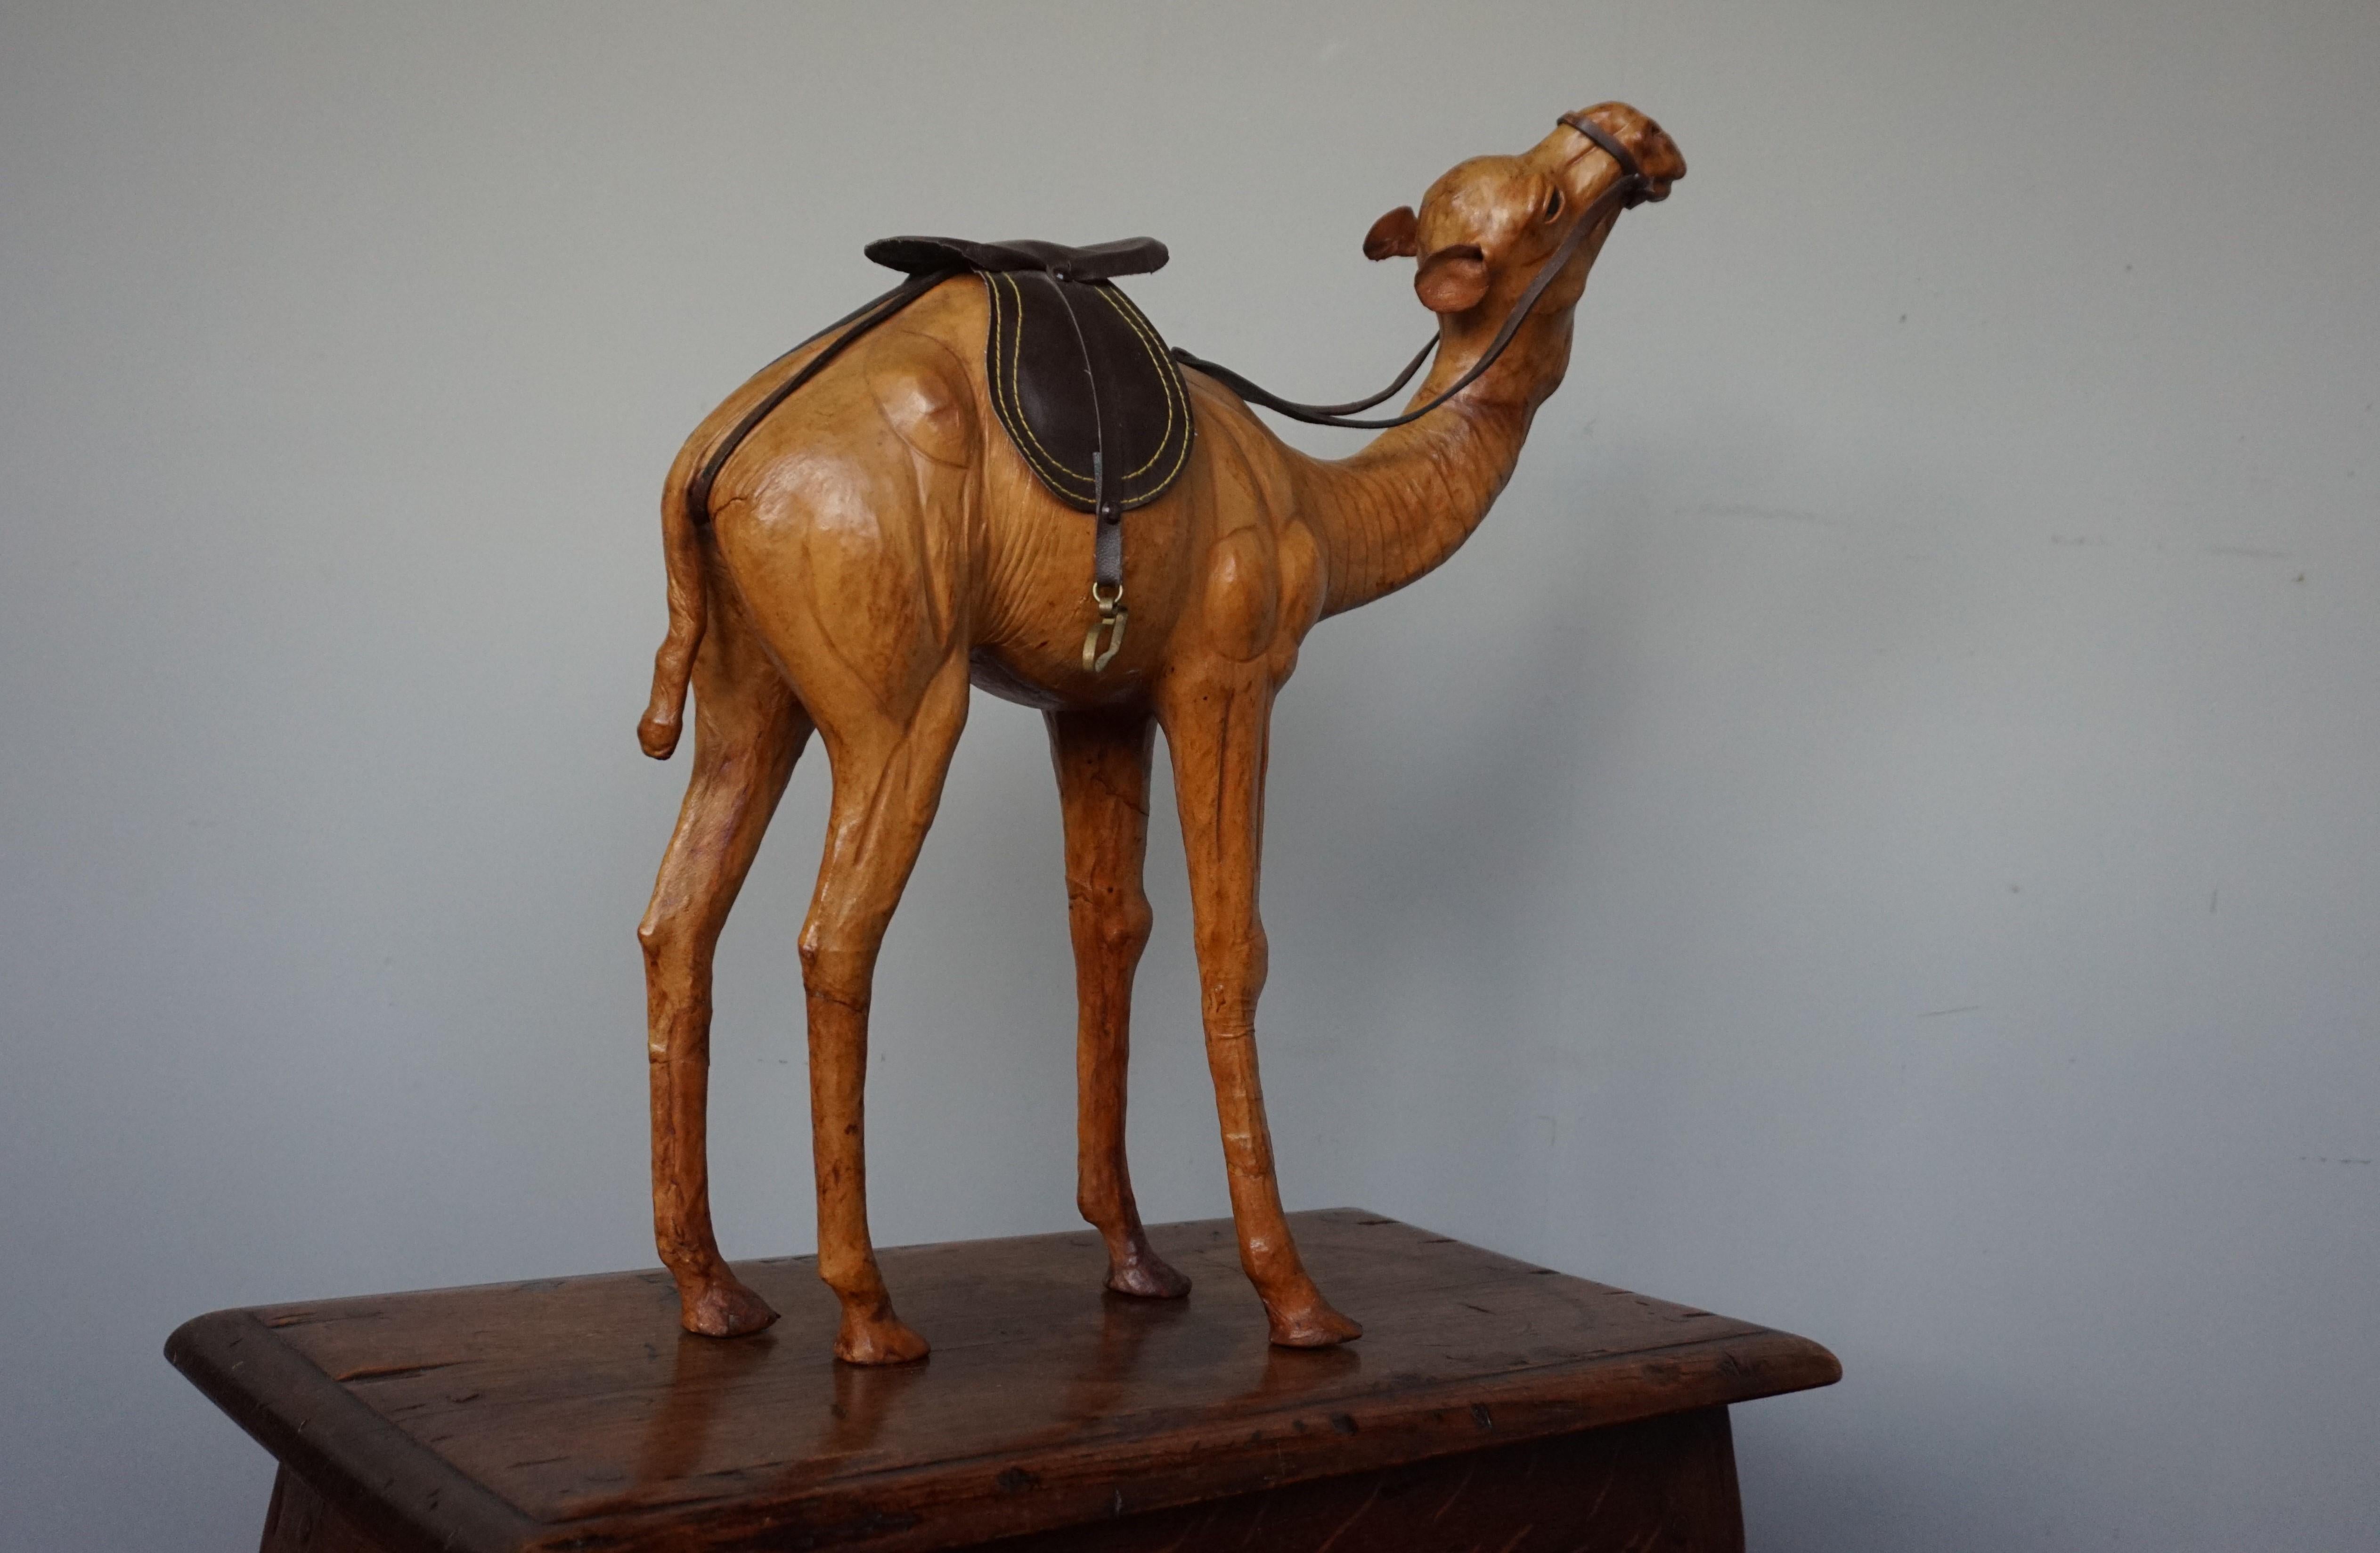 Hand-Carved Sizable Camel Sculpture Leather on Hand Carved Wood with Harness